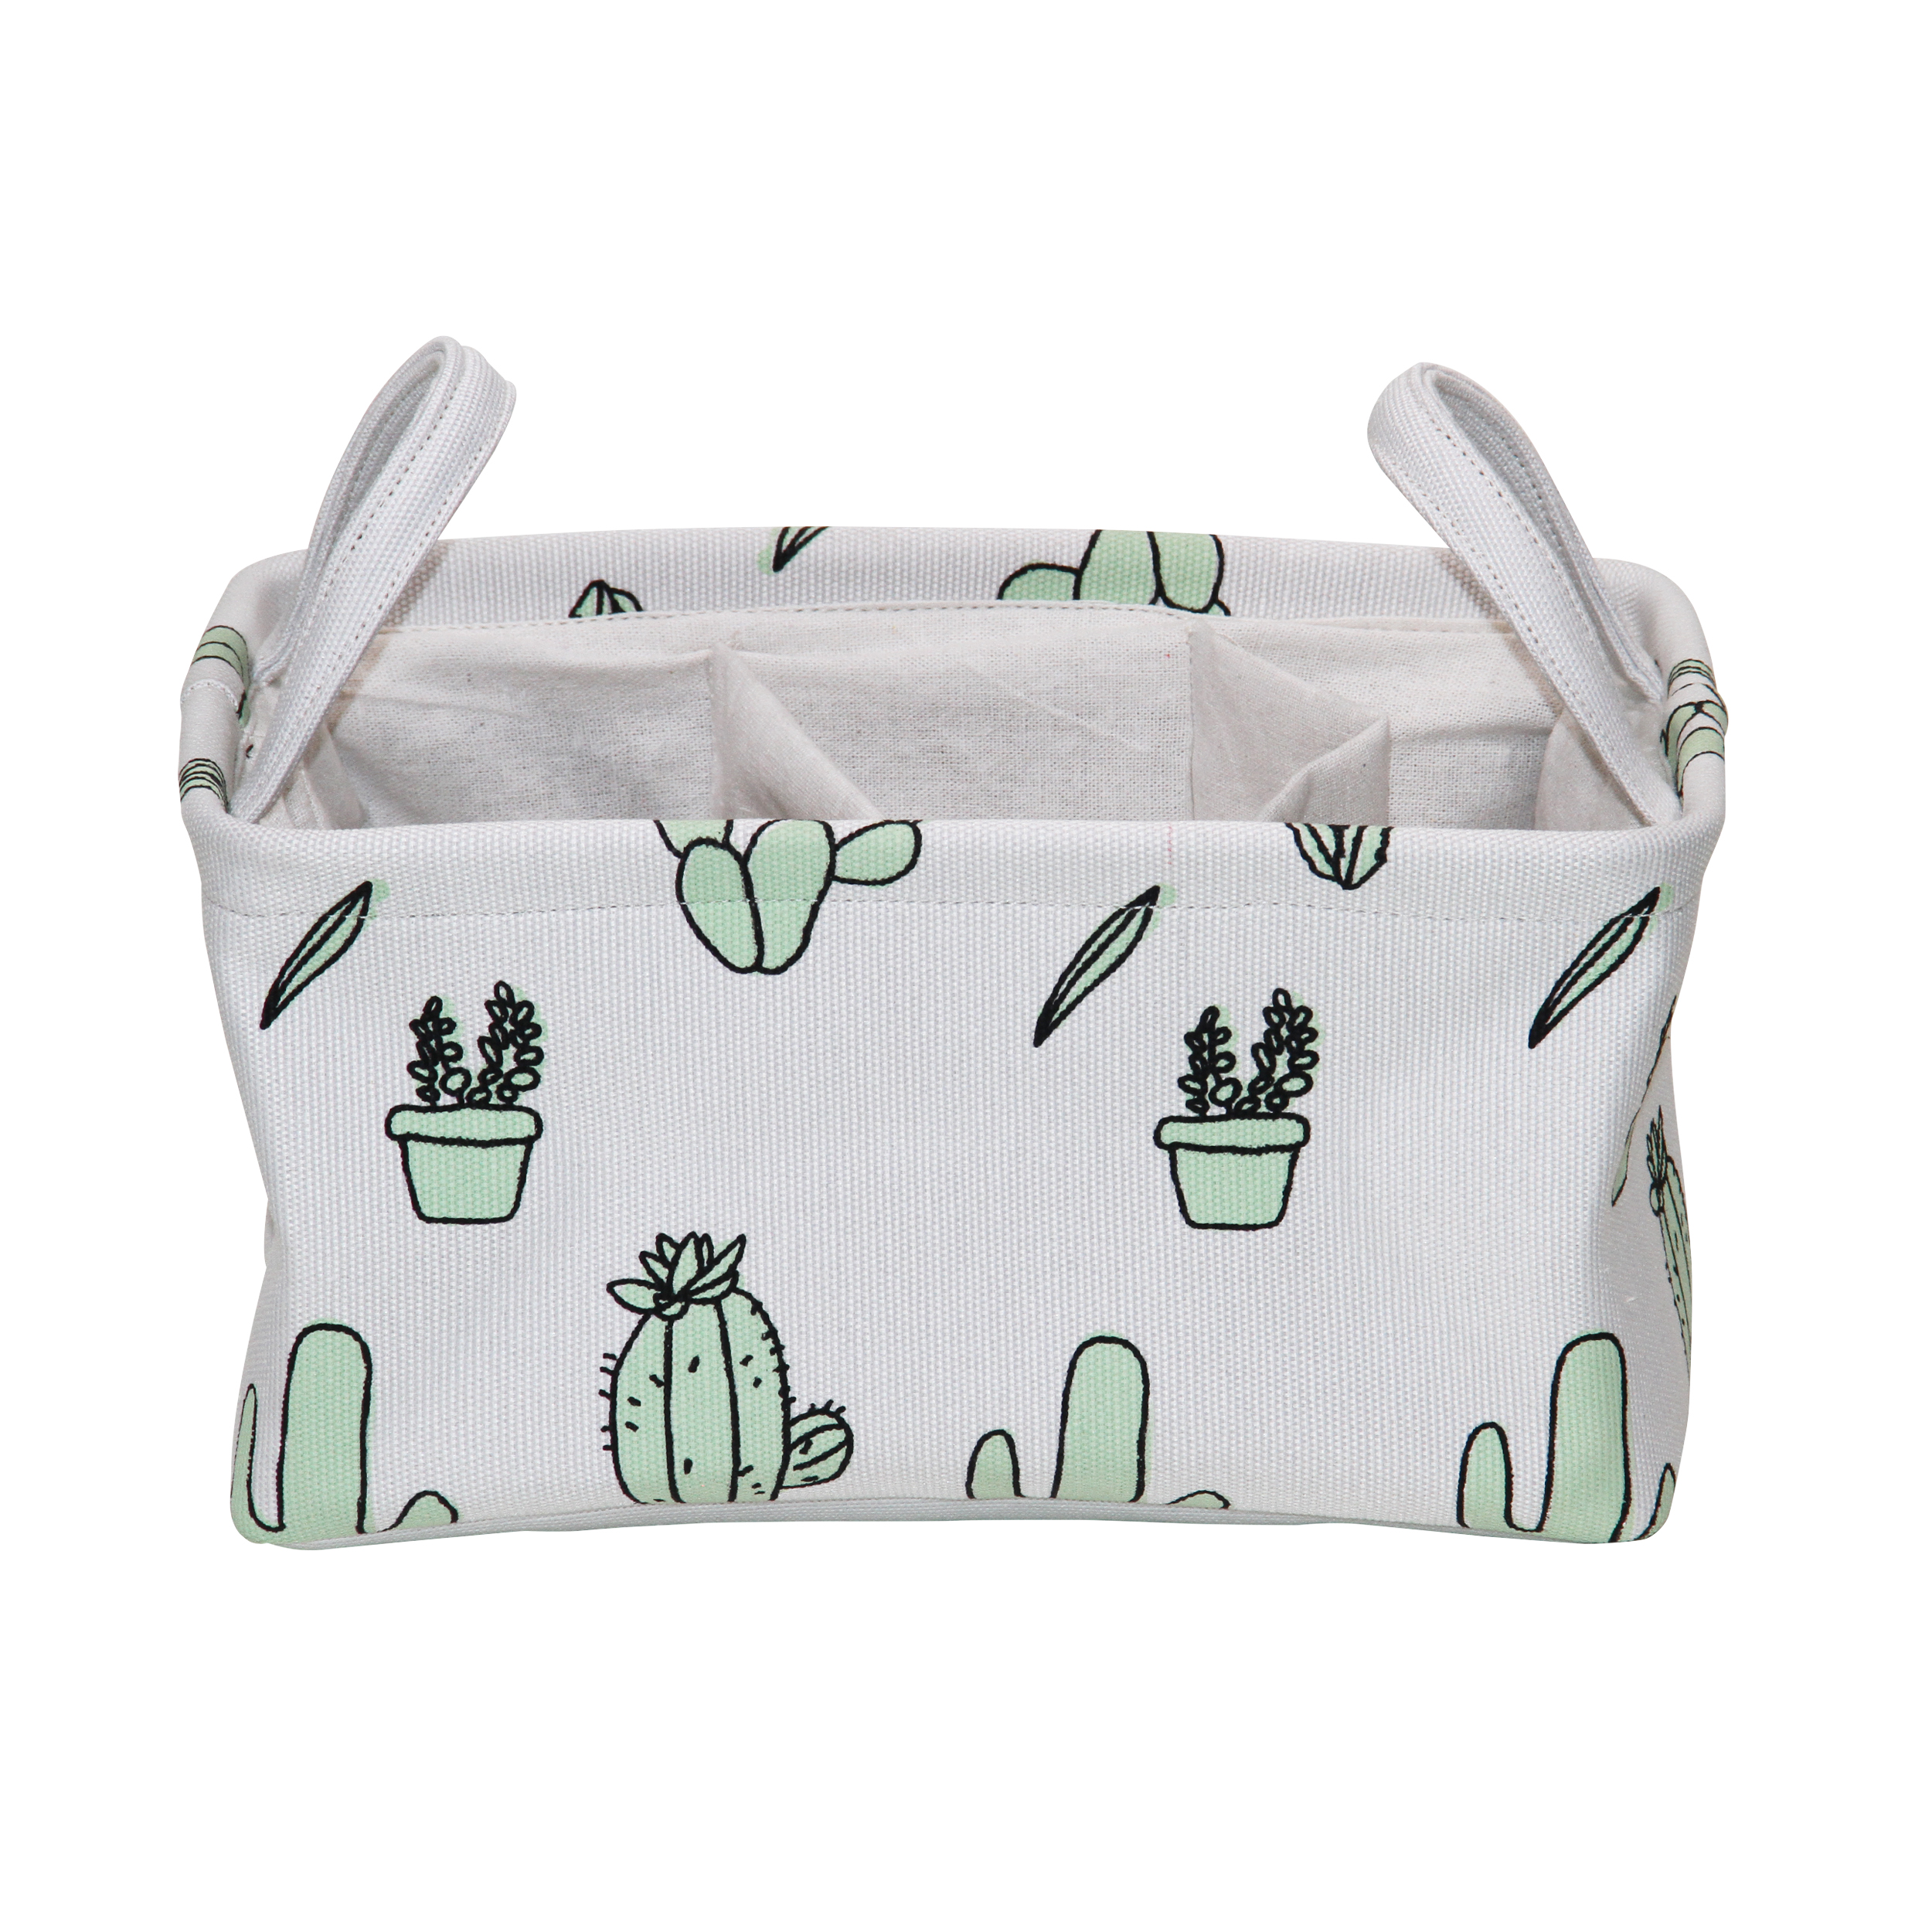 Mainstays Rectangular Collapsible Storage Succulent Fabric Caddy with 2 Dividers - image 1 of 4